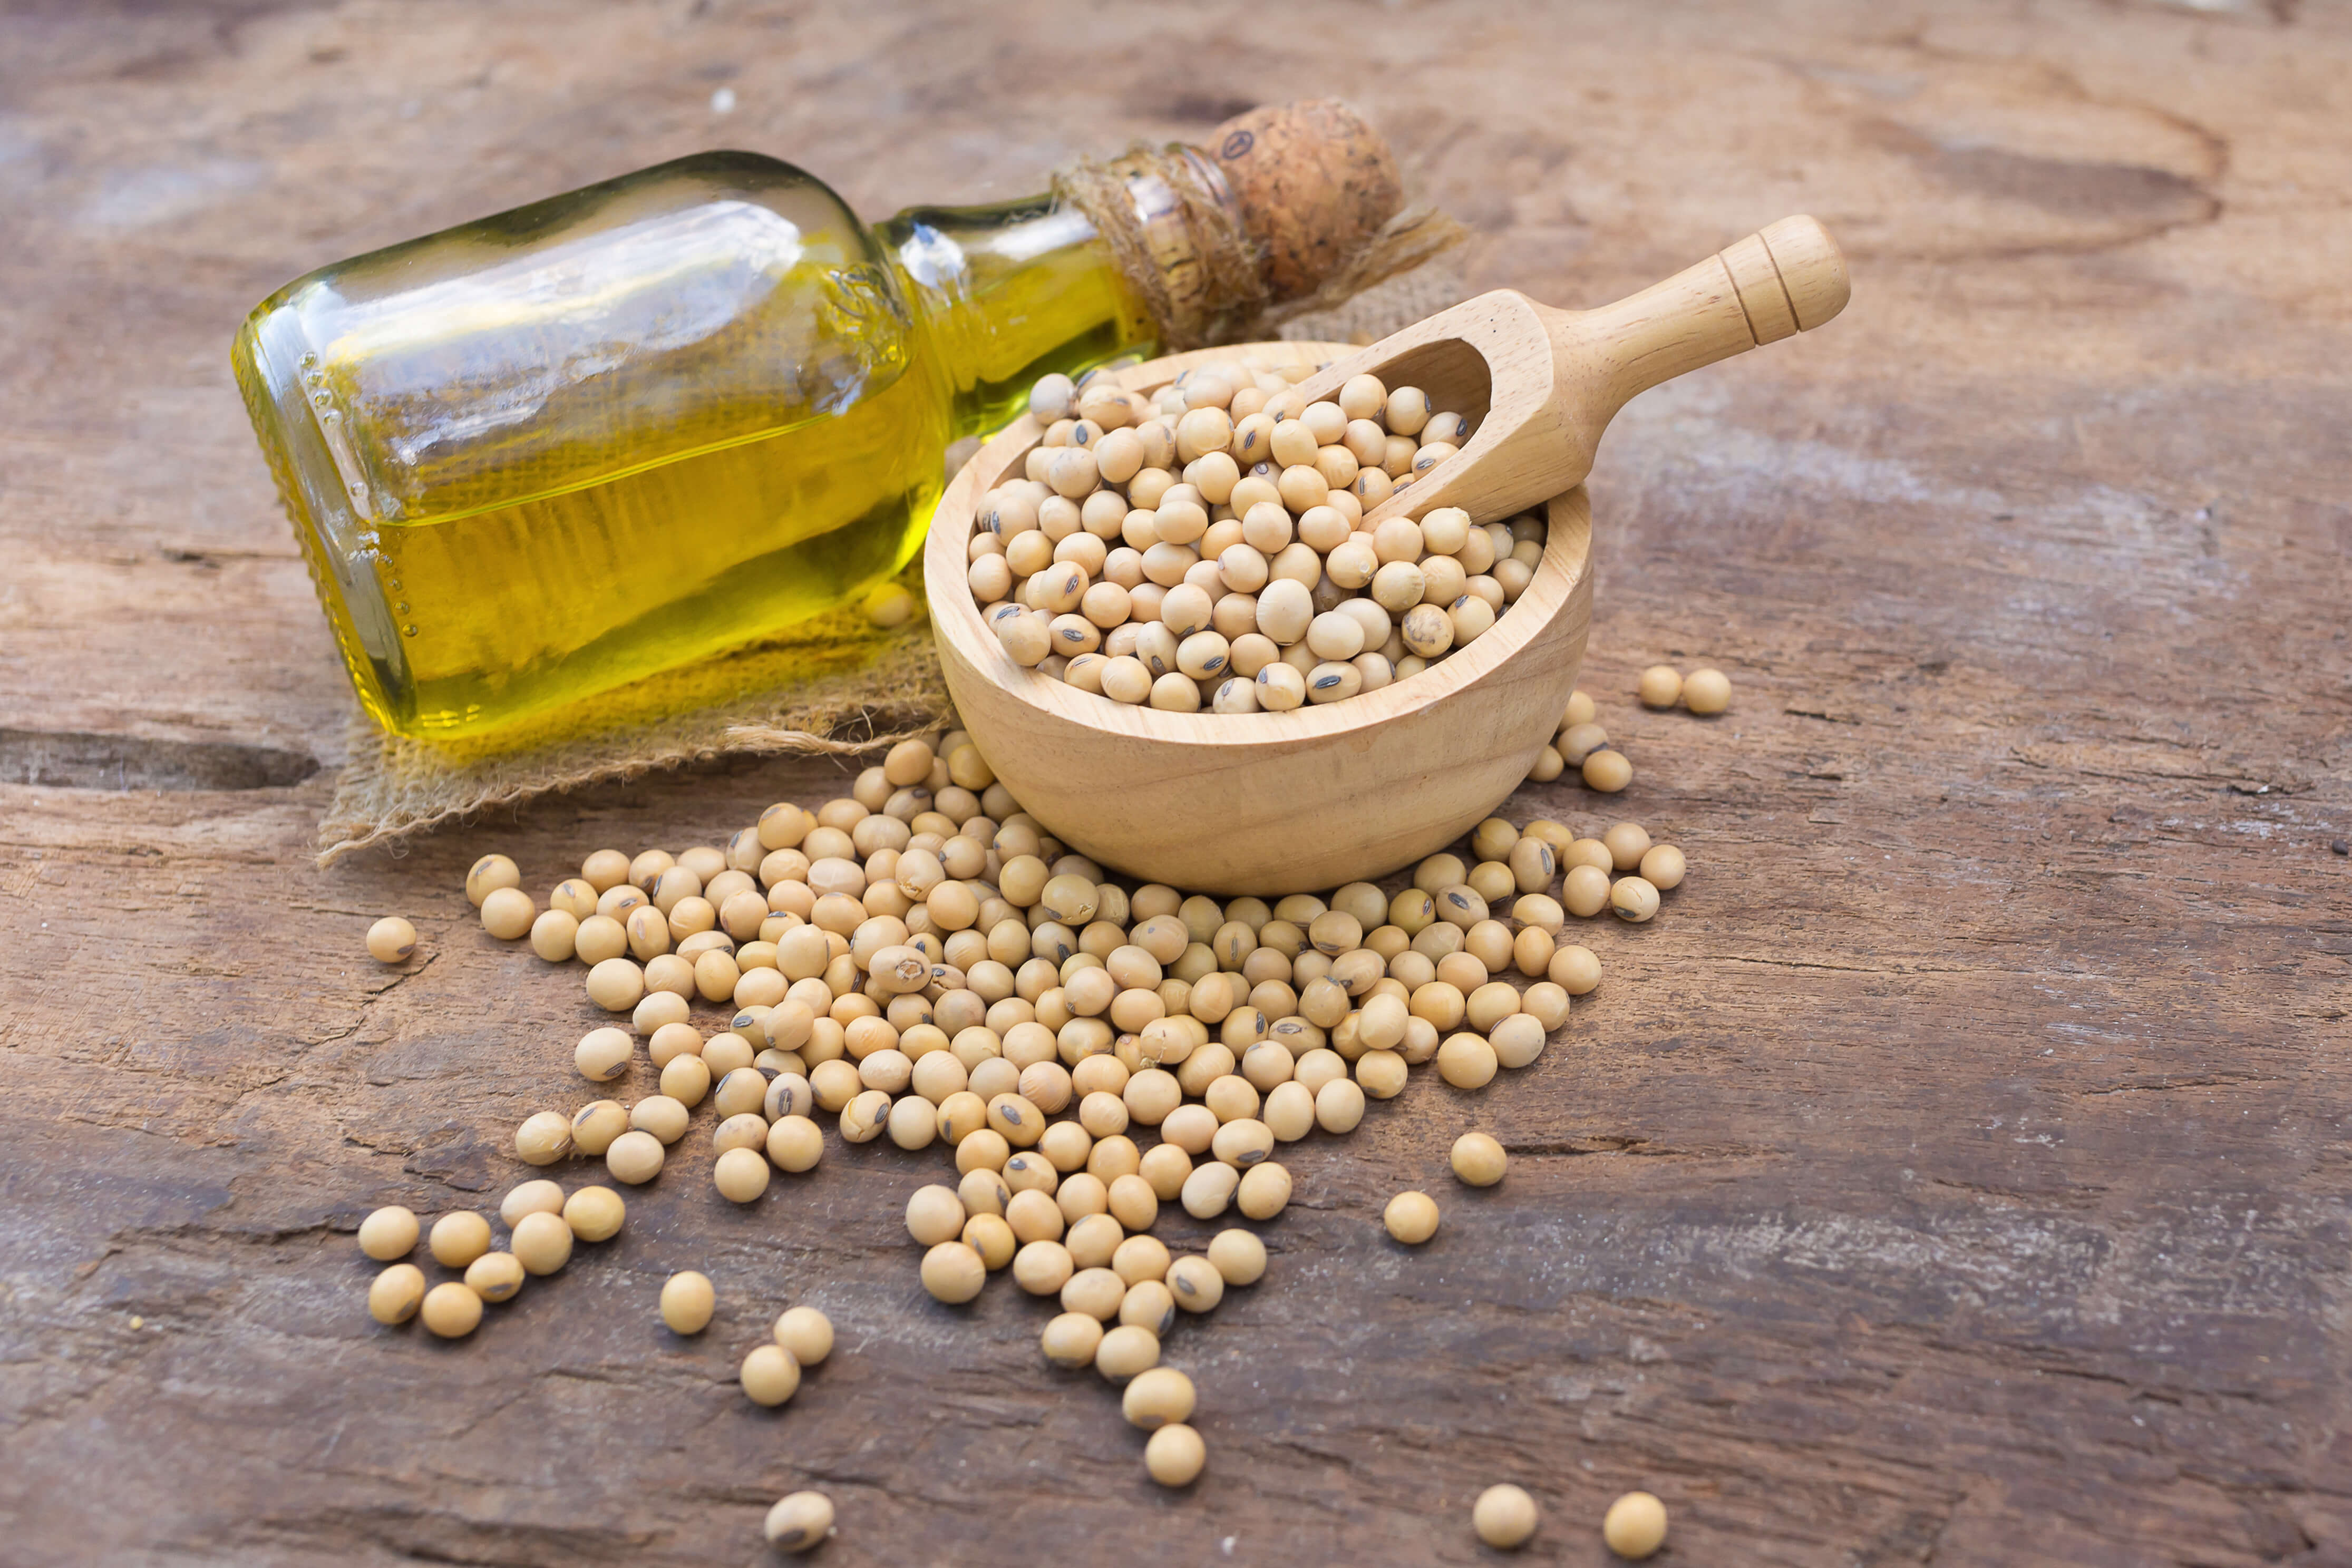 Soybean seed and soybean oil bottle